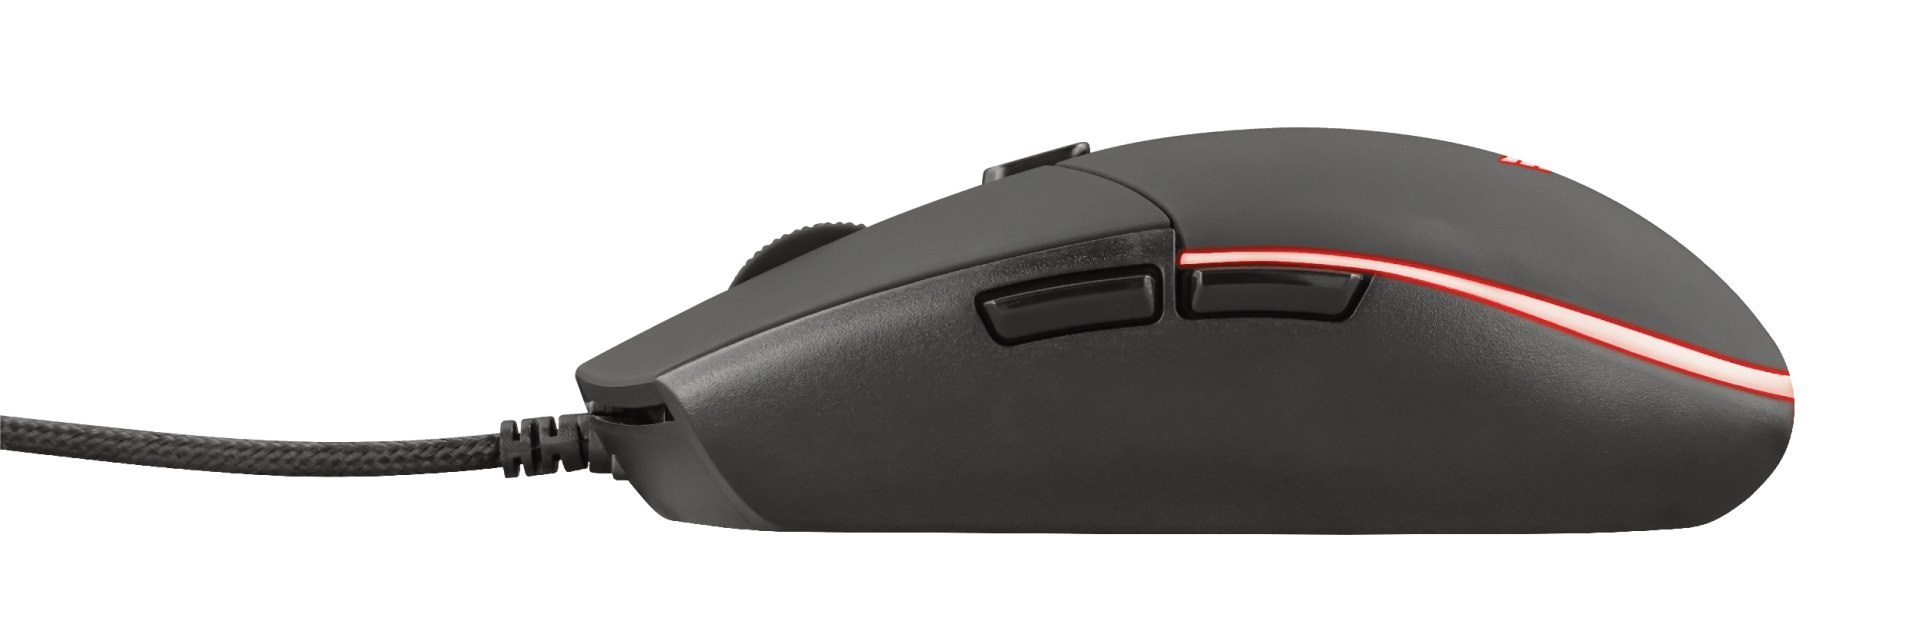 GXT 838 Azor Keyboard and Mouse Set-Side